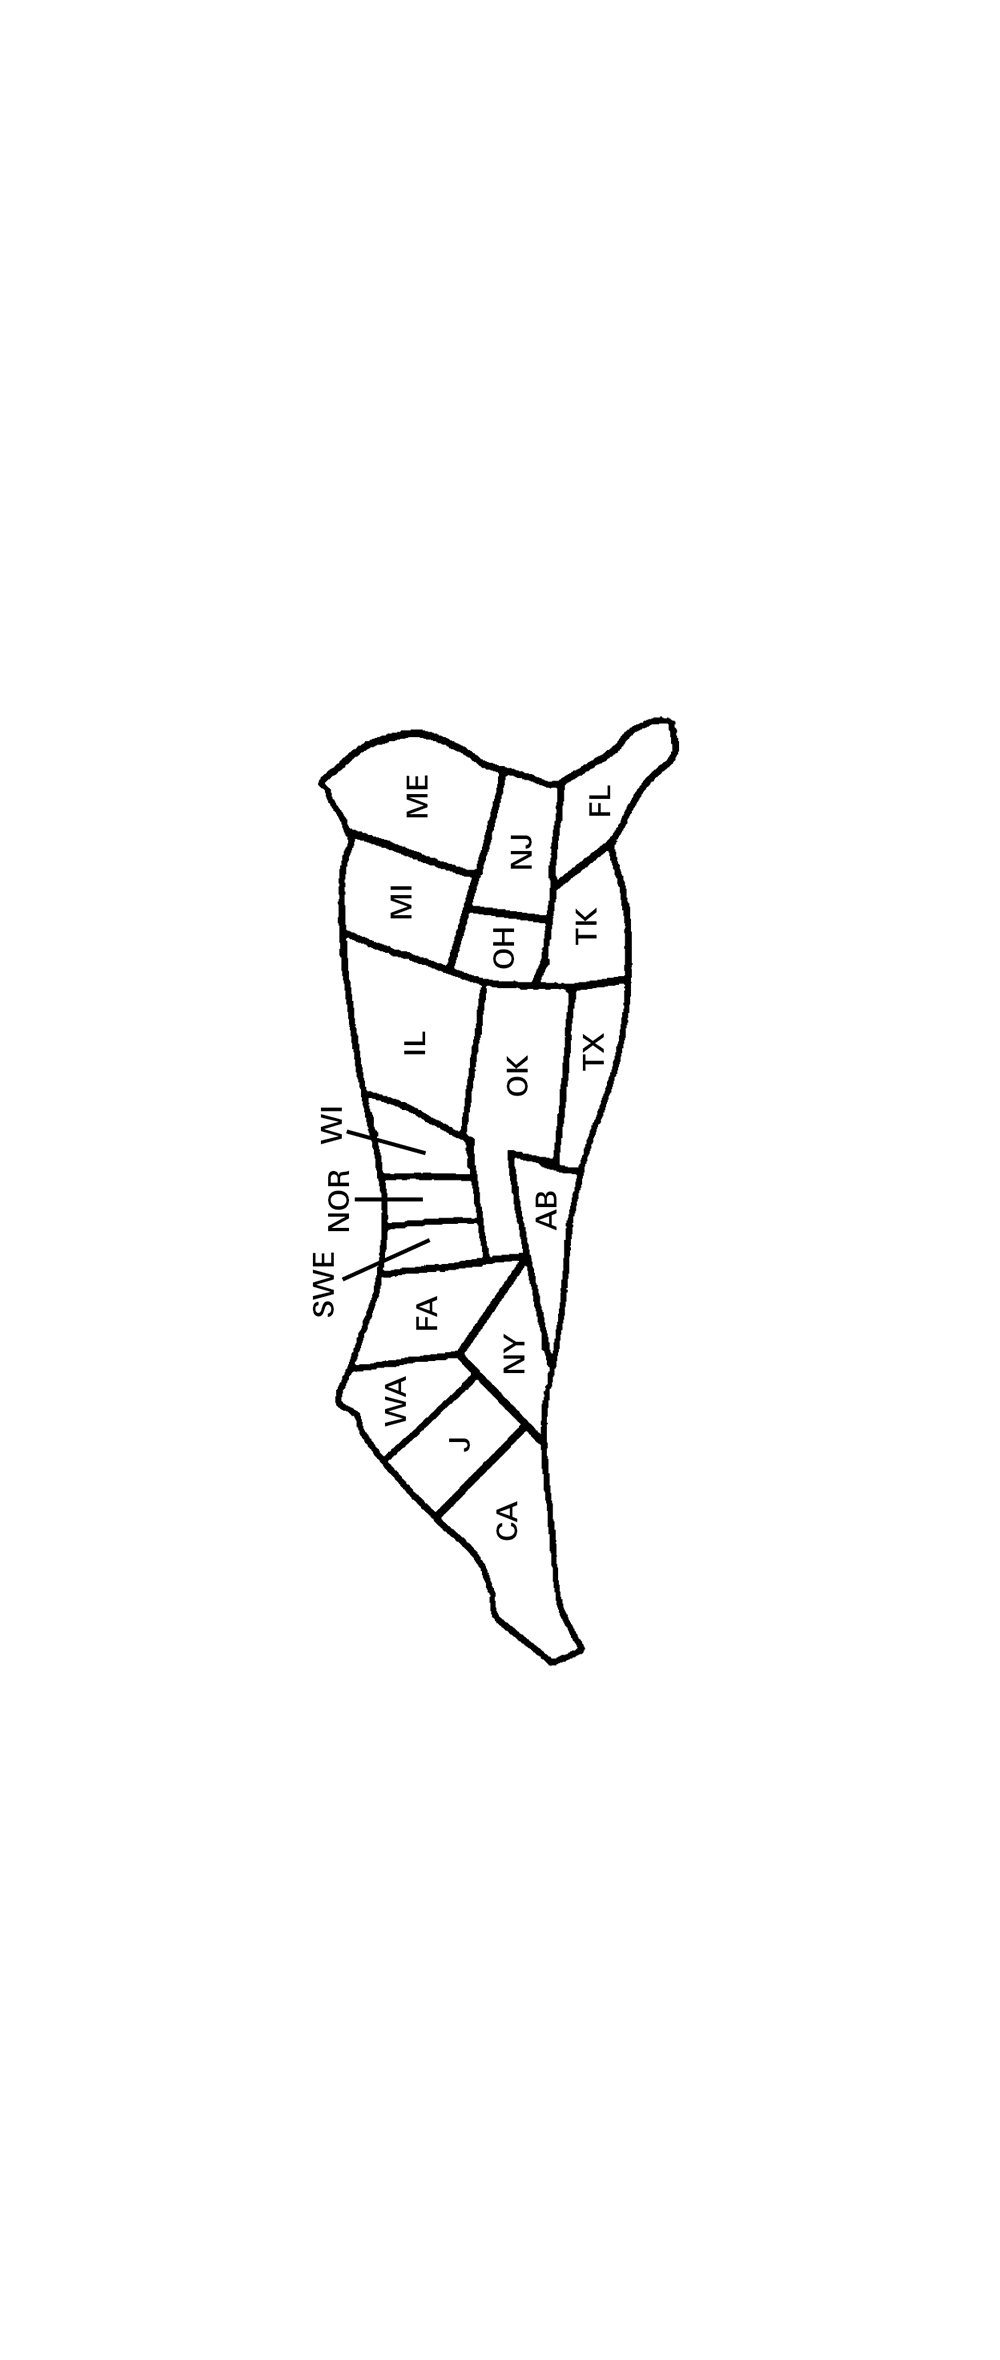 A bookmark by Brian McMullen titled “Fictional Steaks: Prime Cuts,” depicting steak cuts in the style of a U.S. States map.